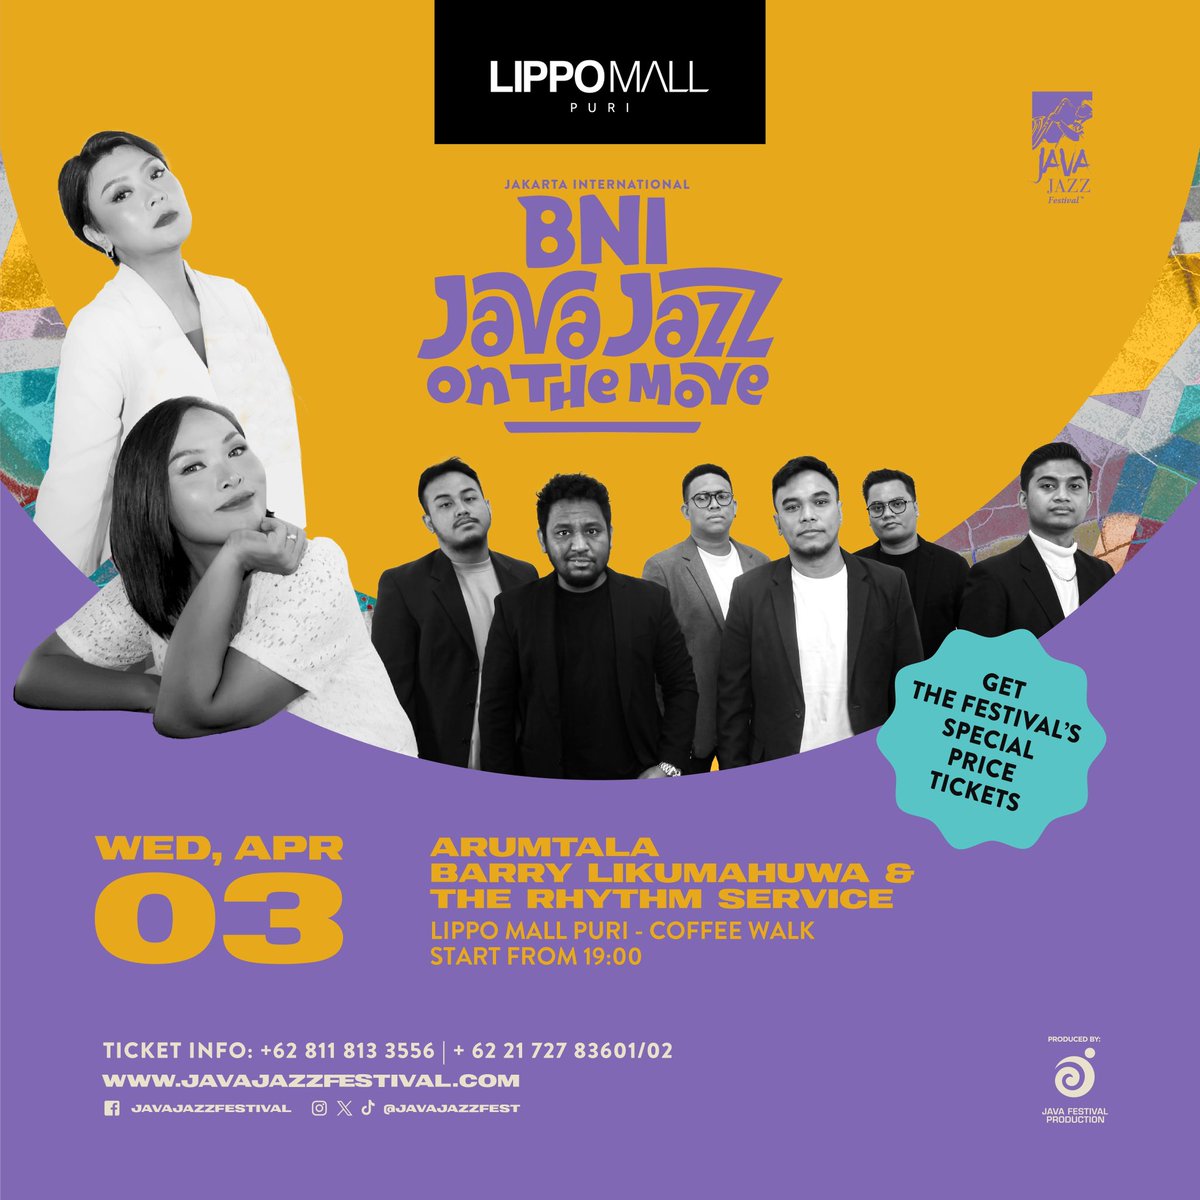 It's your favorite pre-event show, BNI Java Jazz On The Move. Catch Arumtala and Barry Likumahuwa & The Rhythm Service at Lippo Mall puri Indah on April 3rd. Get special ticket prices for #BNIJJF2024 exclusively at BNI Java Jazz on the Move!